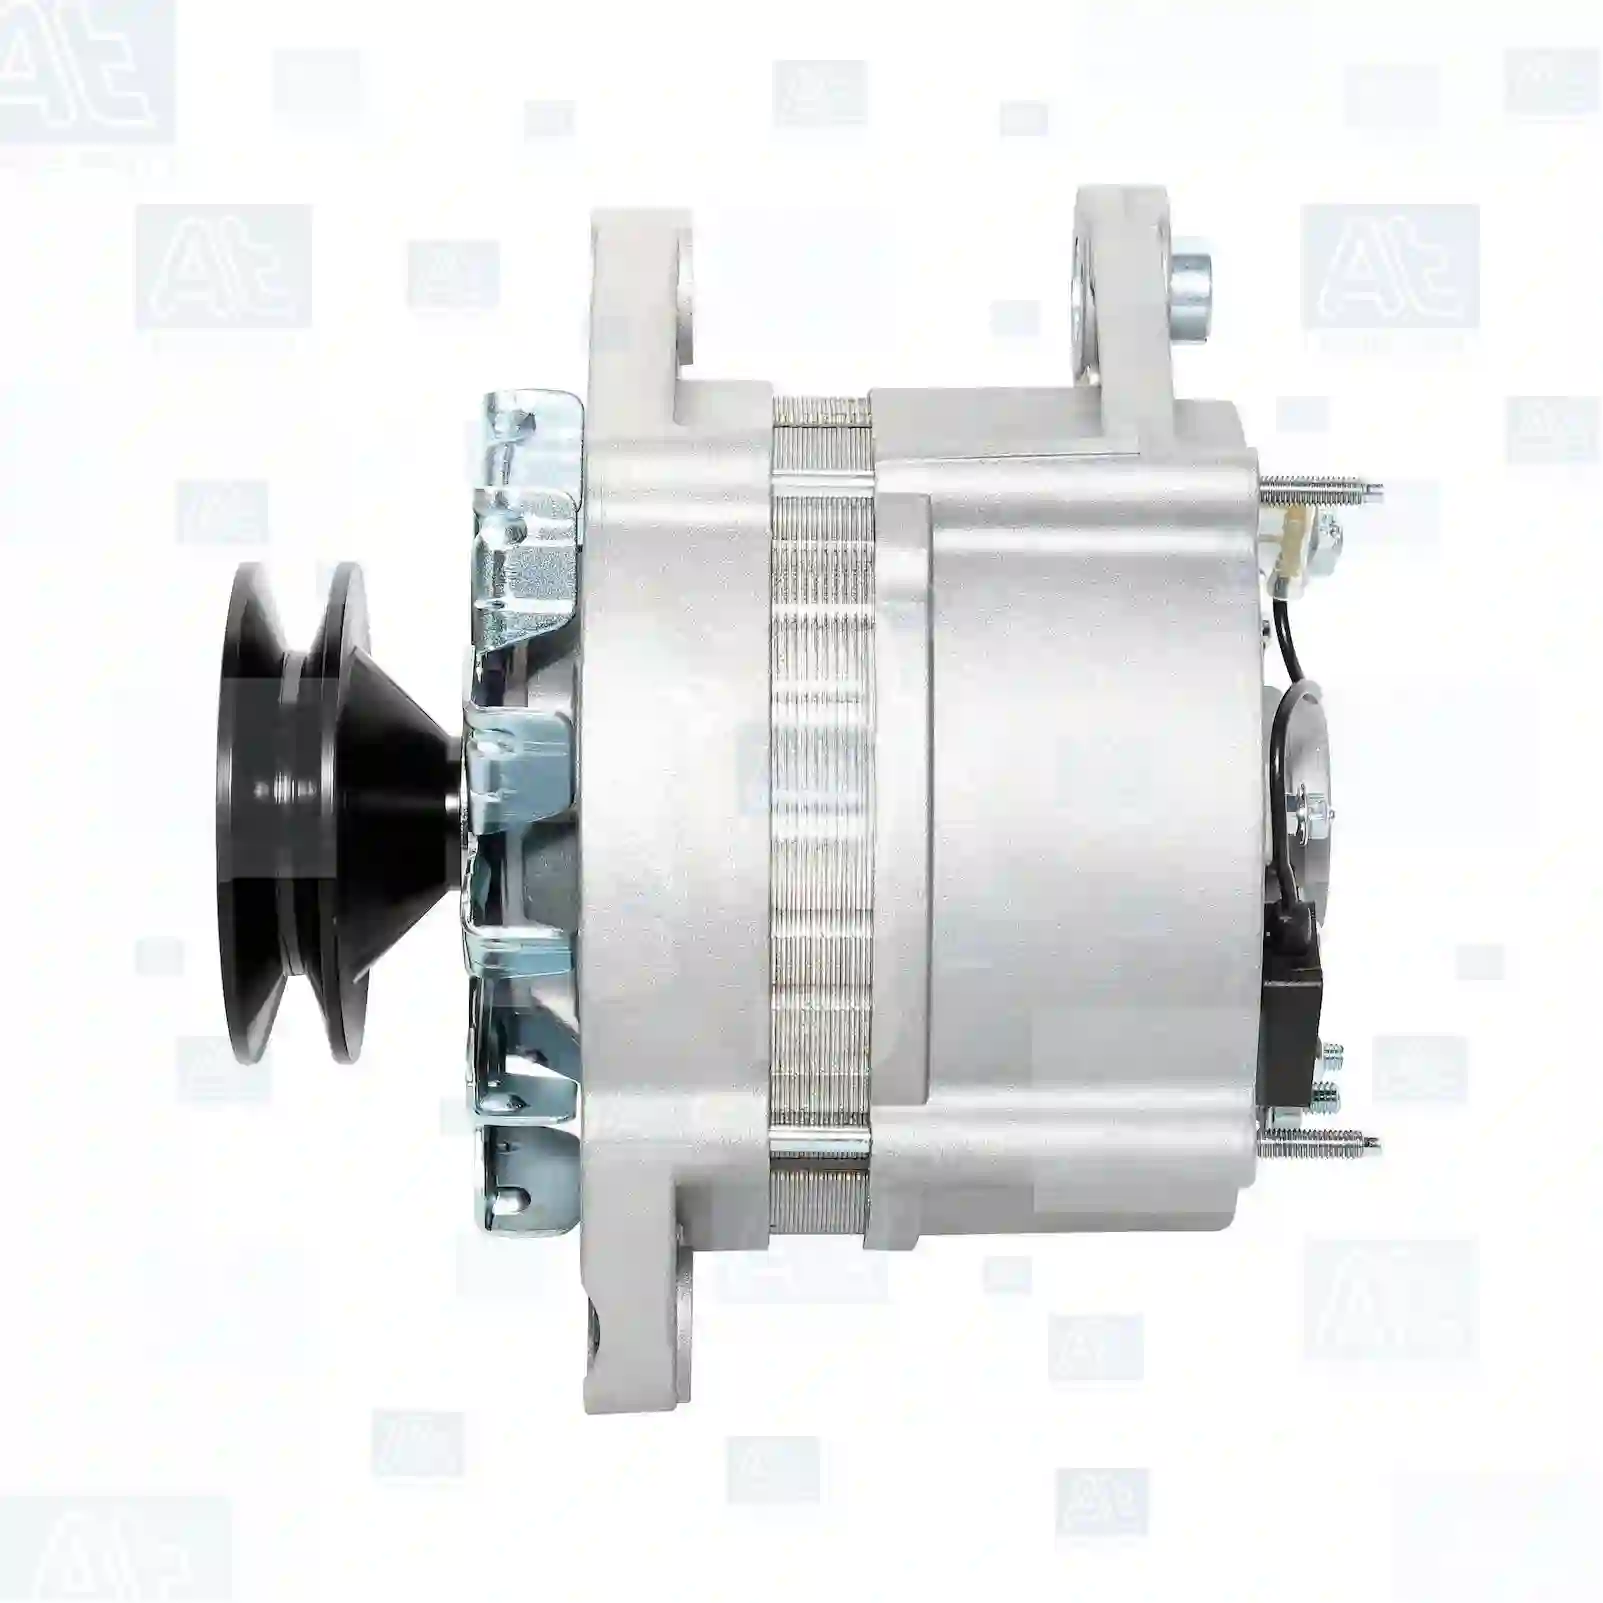 Alternator, at no 77711330, oem no: 87735076, 99461190, 4891511, 1516454, 1516558, 04757192, 04747193, 04757192, 04757193, 04757194, 04757492, 04844266, 79014078, 00107193, 02995020, 02995046, 02995064, 02995068, 02995090, 04474592, 04715786, 04717871, 04721890, 04722724, 04738563, 04738569, 04738570, 04738571, 04738772, 04738775, 04747193, 04757193, 04757194, 04786913, 04808526, 04808528, 04844266, 42498163, 42498164, 42498165, 42498213, 42498271, 4757193, 4757194, 47571930, 4844266, 77050550, 79014078, 88206020, 984190357, 92901321, 98418362, 98419031, 98419032, 98419033, 98419034, 98419035, 98424450, 98465401, 98479517, 98482419, 99448824, 99454110, 99454112, 99461190, 04757192, 04747193, 04757193, 04757194, 943357801, 944357772, 98424450, 4757192, 4757193, 38520137A, 38520137F At Spare Part | Engine, Accelerator Pedal, Camshaft, Connecting Rod, Crankcase, Crankshaft, Cylinder Head, Engine Suspension Mountings, Exhaust Manifold, Exhaust Gas Recirculation, Filter Kits, Flywheel Housing, General Overhaul Kits, Engine, Intake Manifold, Oil Cleaner, Oil Cooler, Oil Filter, Oil Pump, Oil Sump, Piston & Liner, Sensor & Switch, Timing Case, Turbocharger, Cooling System, Belt Tensioner, Coolant Filter, Coolant Pipe, Corrosion Prevention Agent, Drive, Expansion Tank, Fan, Intercooler, Monitors & Gauges, Radiator, Thermostat, V-Belt / Timing belt, Water Pump, Fuel System, Electronical Injector Unit, Feed Pump, Fuel Filter, cpl., Fuel Gauge Sender,  Fuel Line, Fuel Pump, Fuel Tank, Injection Line Kit, Injection Pump, Exhaust System, Clutch & Pedal, Gearbox, Propeller Shaft, Axles, Brake System, Hubs & Wheels, Suspension, Leaf Spring, Universal Parts / Accessories, Steering, Electrical System, Cabin Alternator, at no 77711330, oem no: 87735076, 99461190, 4891511, 1516454, 1516558, 04757192, 04747193, 04757192, 04757193, 04757194, 04757492, 04844266, 79014078, 00107193, 02995020, 02995046, 02995064, 02995068, 02995090, 04474592, 04715786, 04717871, 04721890, 04722724, 04738563, 04738569, 04738570, 04738571, 04738772, 04738775, 04747193, 04757193, 04757194, 04786913, 04808526, 04808528, 04844266, 42498163, 42498164, 42498165, 42498213, 42498271, 4757193, 4757194, 47571930, 4844266, 77050550, 79014078, 88206020, 984190357, 92901321, 98418362, 98419031, 98419032, 98419033, 98419034, 98419035, 98424450, 98465401, 98479517, 98482419, 99448824, 99454110, 99454112, 99461190, 04757192, 04747193, 04757193, 04757194, 943357801, 944357772, 98424450, 4757192, 4757193, 38520137A, 38520137F At Spare Part | Engine, Accelerator Pedal, Camshaft, Connecting Rod, Crankcase, Crankshaft, Cylinder Head, Engine Suspension Mountings, Exhaust Manifold, Exhaust Gas Recirculation, Filter Kits, Flywheel Housing, General Overhaul Kits, Engine, Intake Manifold, Oil Cleaner, Oil Cooler, Oil Filter, Oil Pump, Oil Sump, Piston & Liner, Sensor & Switch, Timing Case, Turbocharger, Cooling System, Belt Tensioner, Coolant Filter, Coolant Pipe, Corrosion Prevention Agent, Drive, Expansion Tank, Fan, Intercooler, Monitors & Gauges, Radiator, Thermostat, V-Belt / Timing belt, Water Pump, Fuel System, Electronical Injector Unit, Feed Pump, Fuel Filter, cpl., Fuel Gauge Sender,  Fuel Line, Fuel Pump, Fuel Tank, Injection Line Kit, Injection Pump, Exhaust System, Clutch & Pedal, Gearbox, Propeller Shaft, Axles, Brake System, Hubs & Wheels, Suspension, Leaf Spring, Universal Parts / Accessories, Steering, Electrical System, Cabin